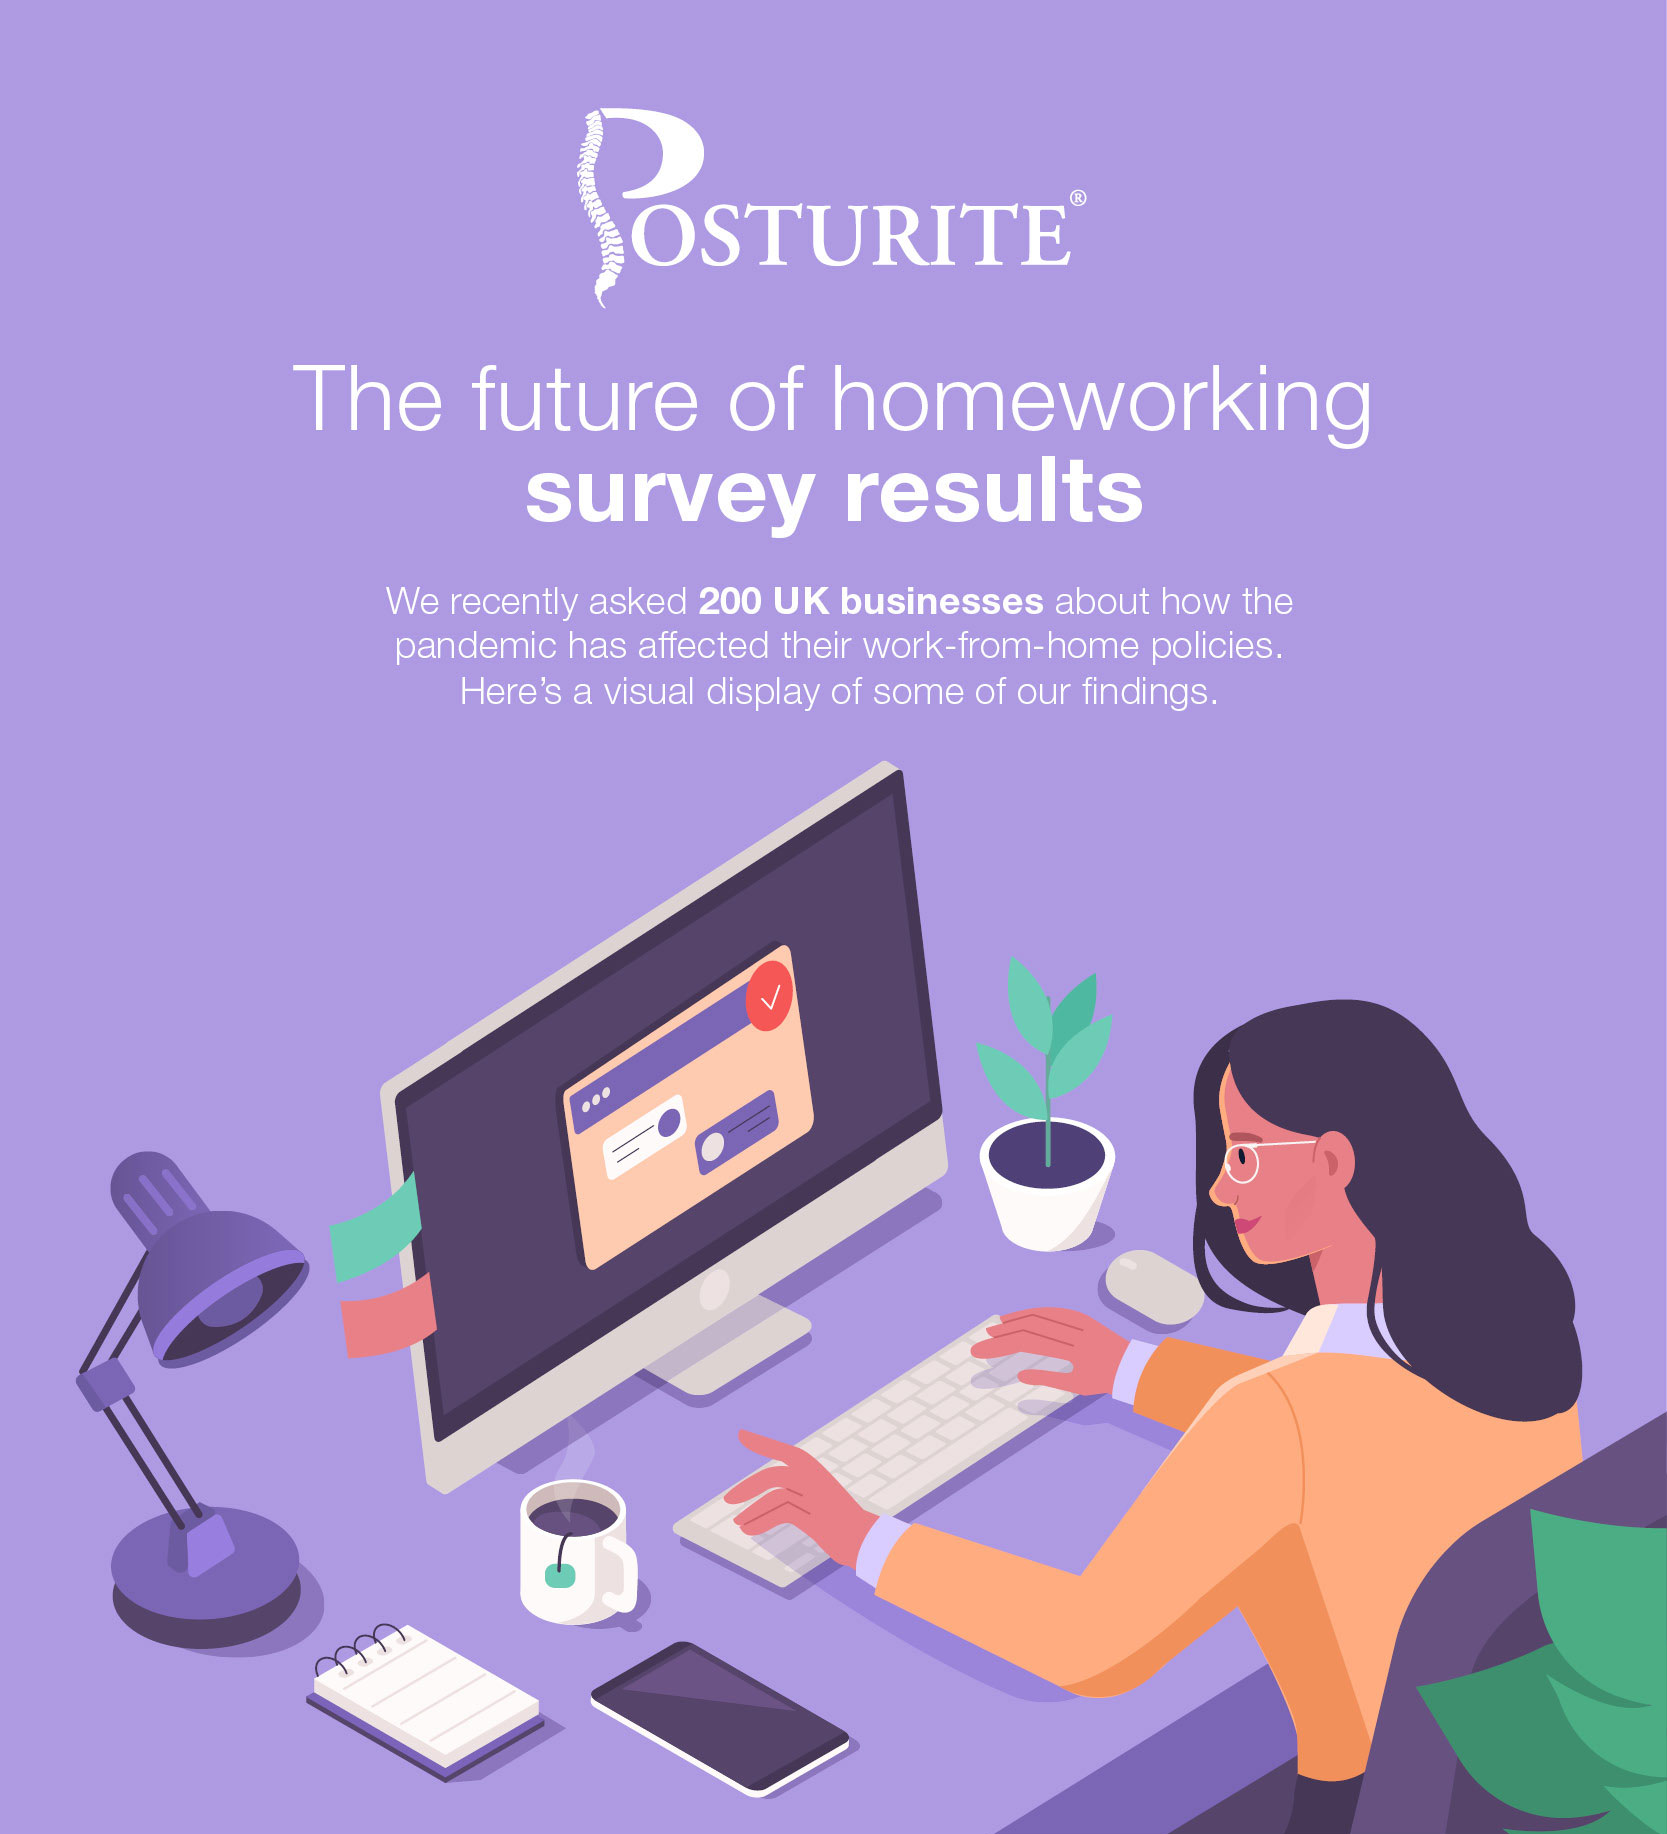 Illustration with wording: The future of homeworking survey results - we recently asked 200 UK businesses about how the pandemic has affected their work-from-home policies.